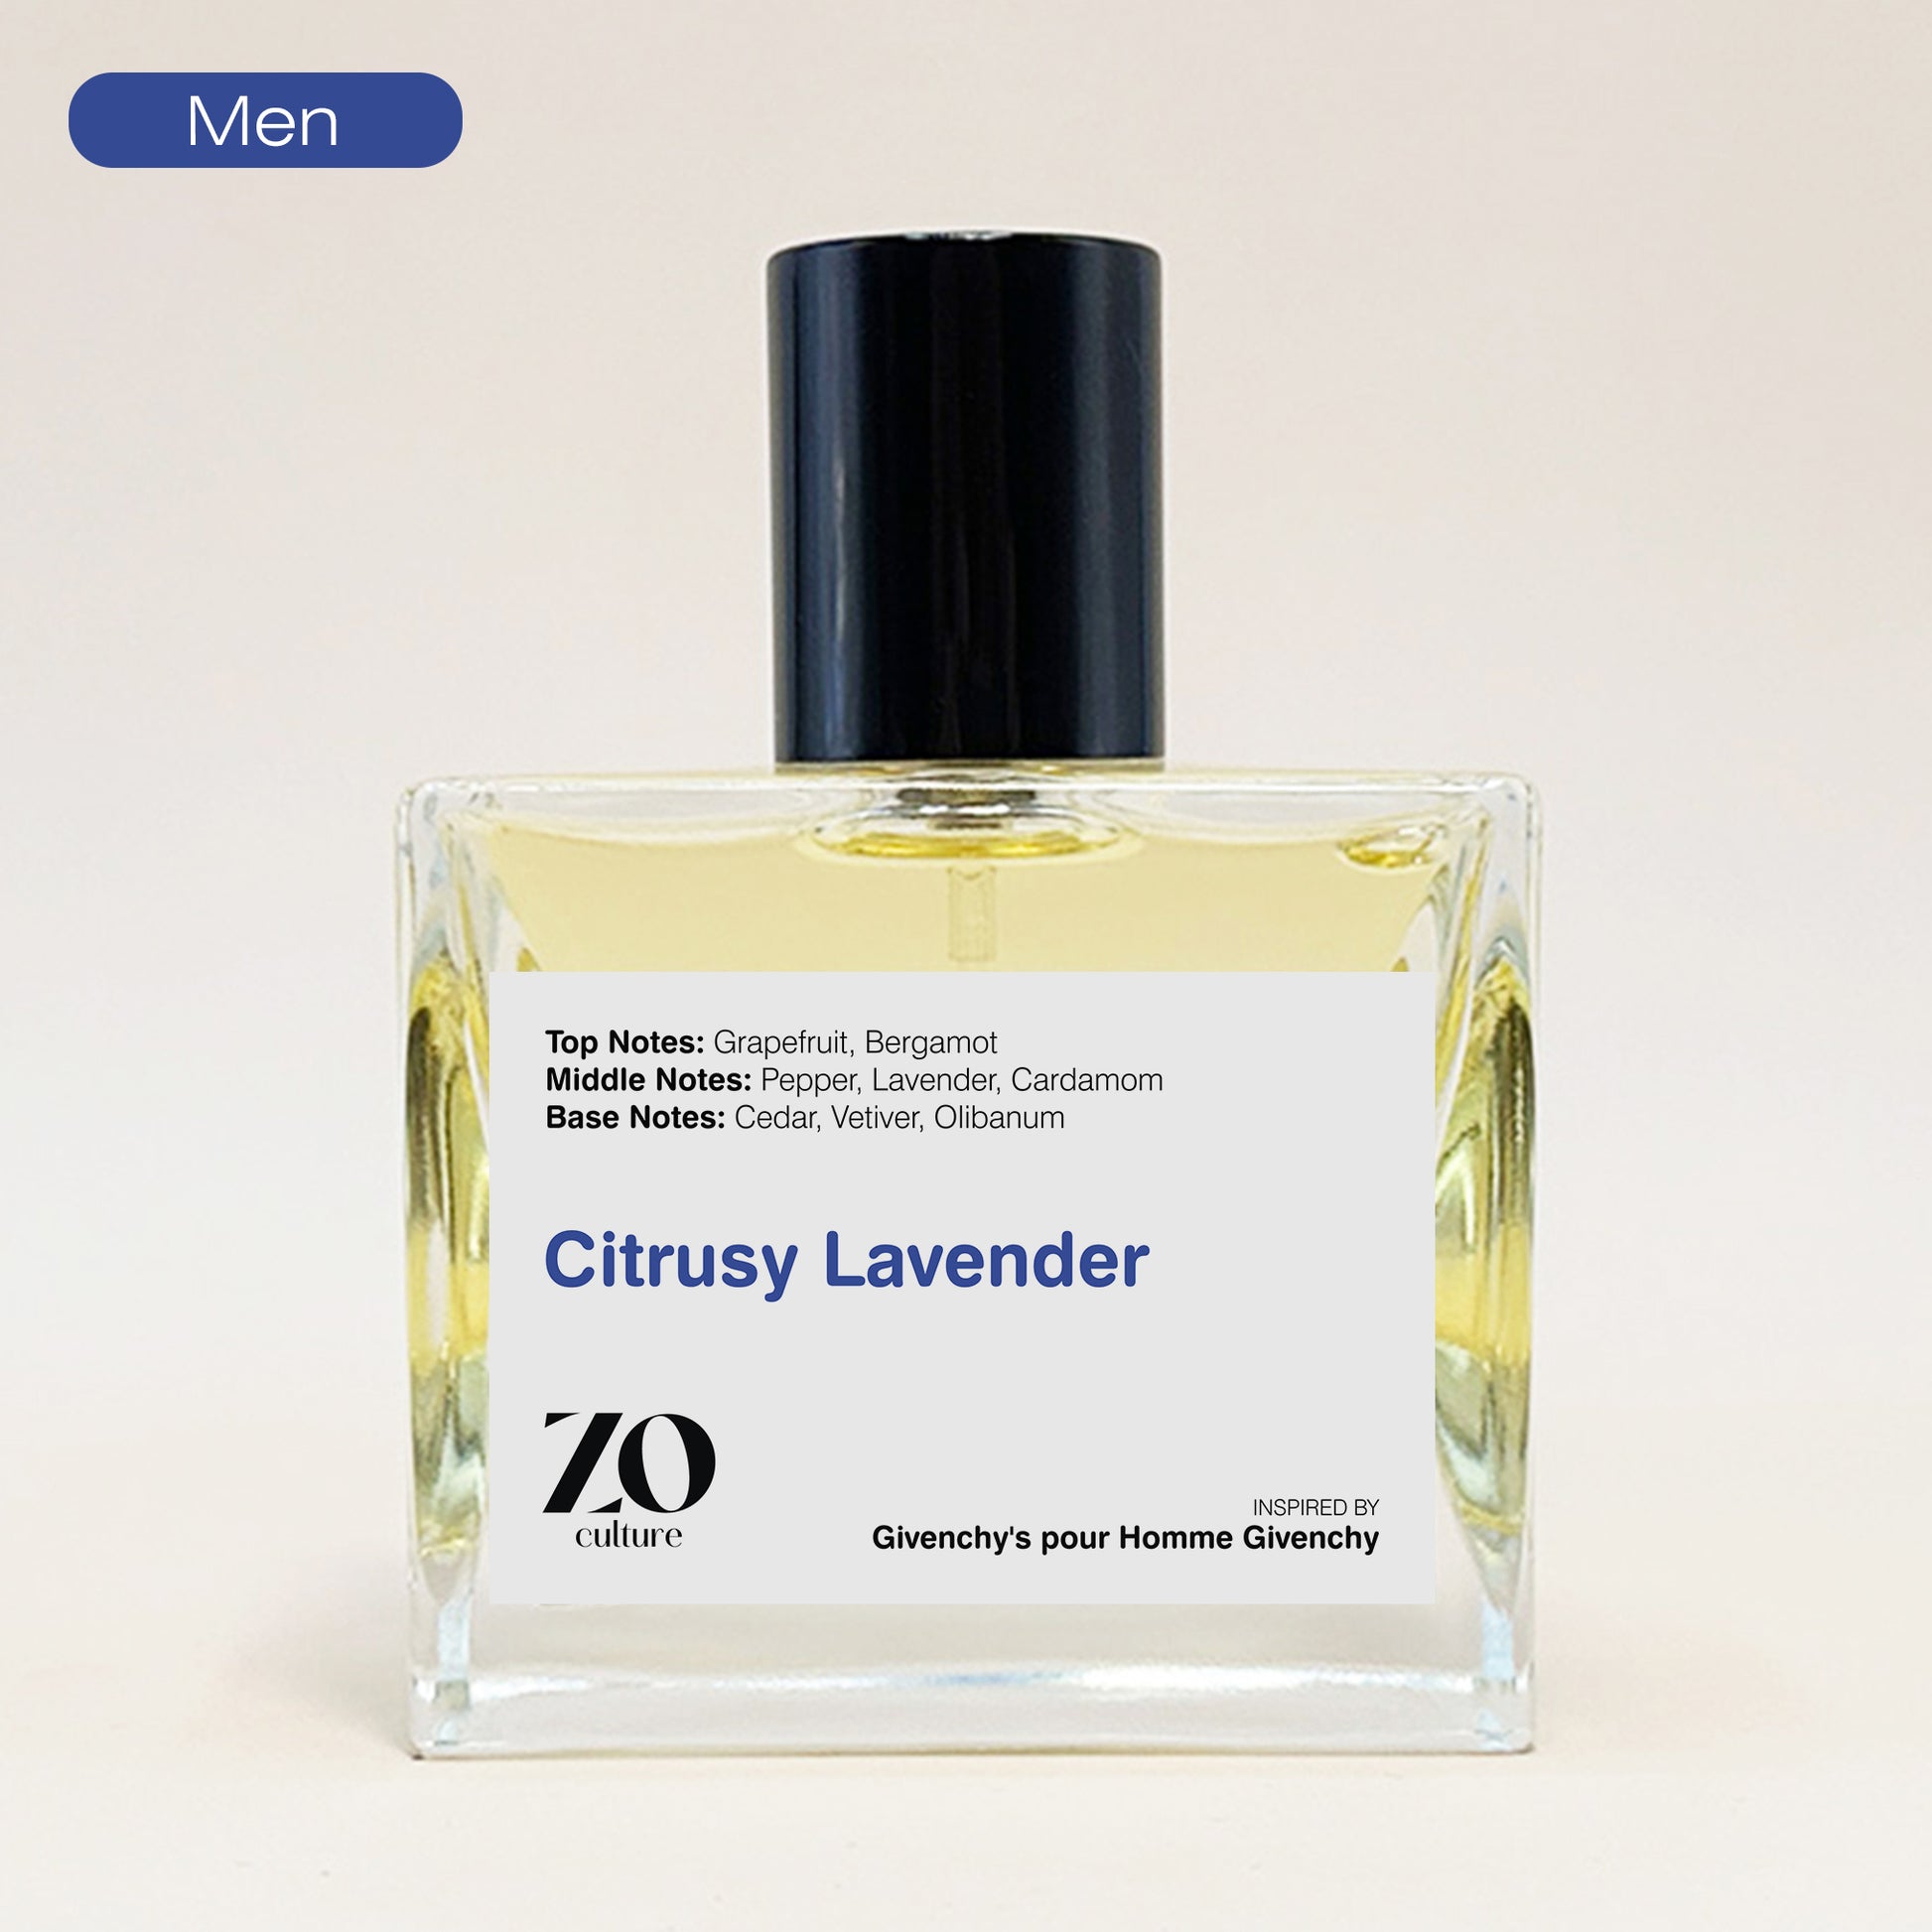 Men Perfume Citrusy Lavender - Inspired by Givenchy pour Homme ZoCulture